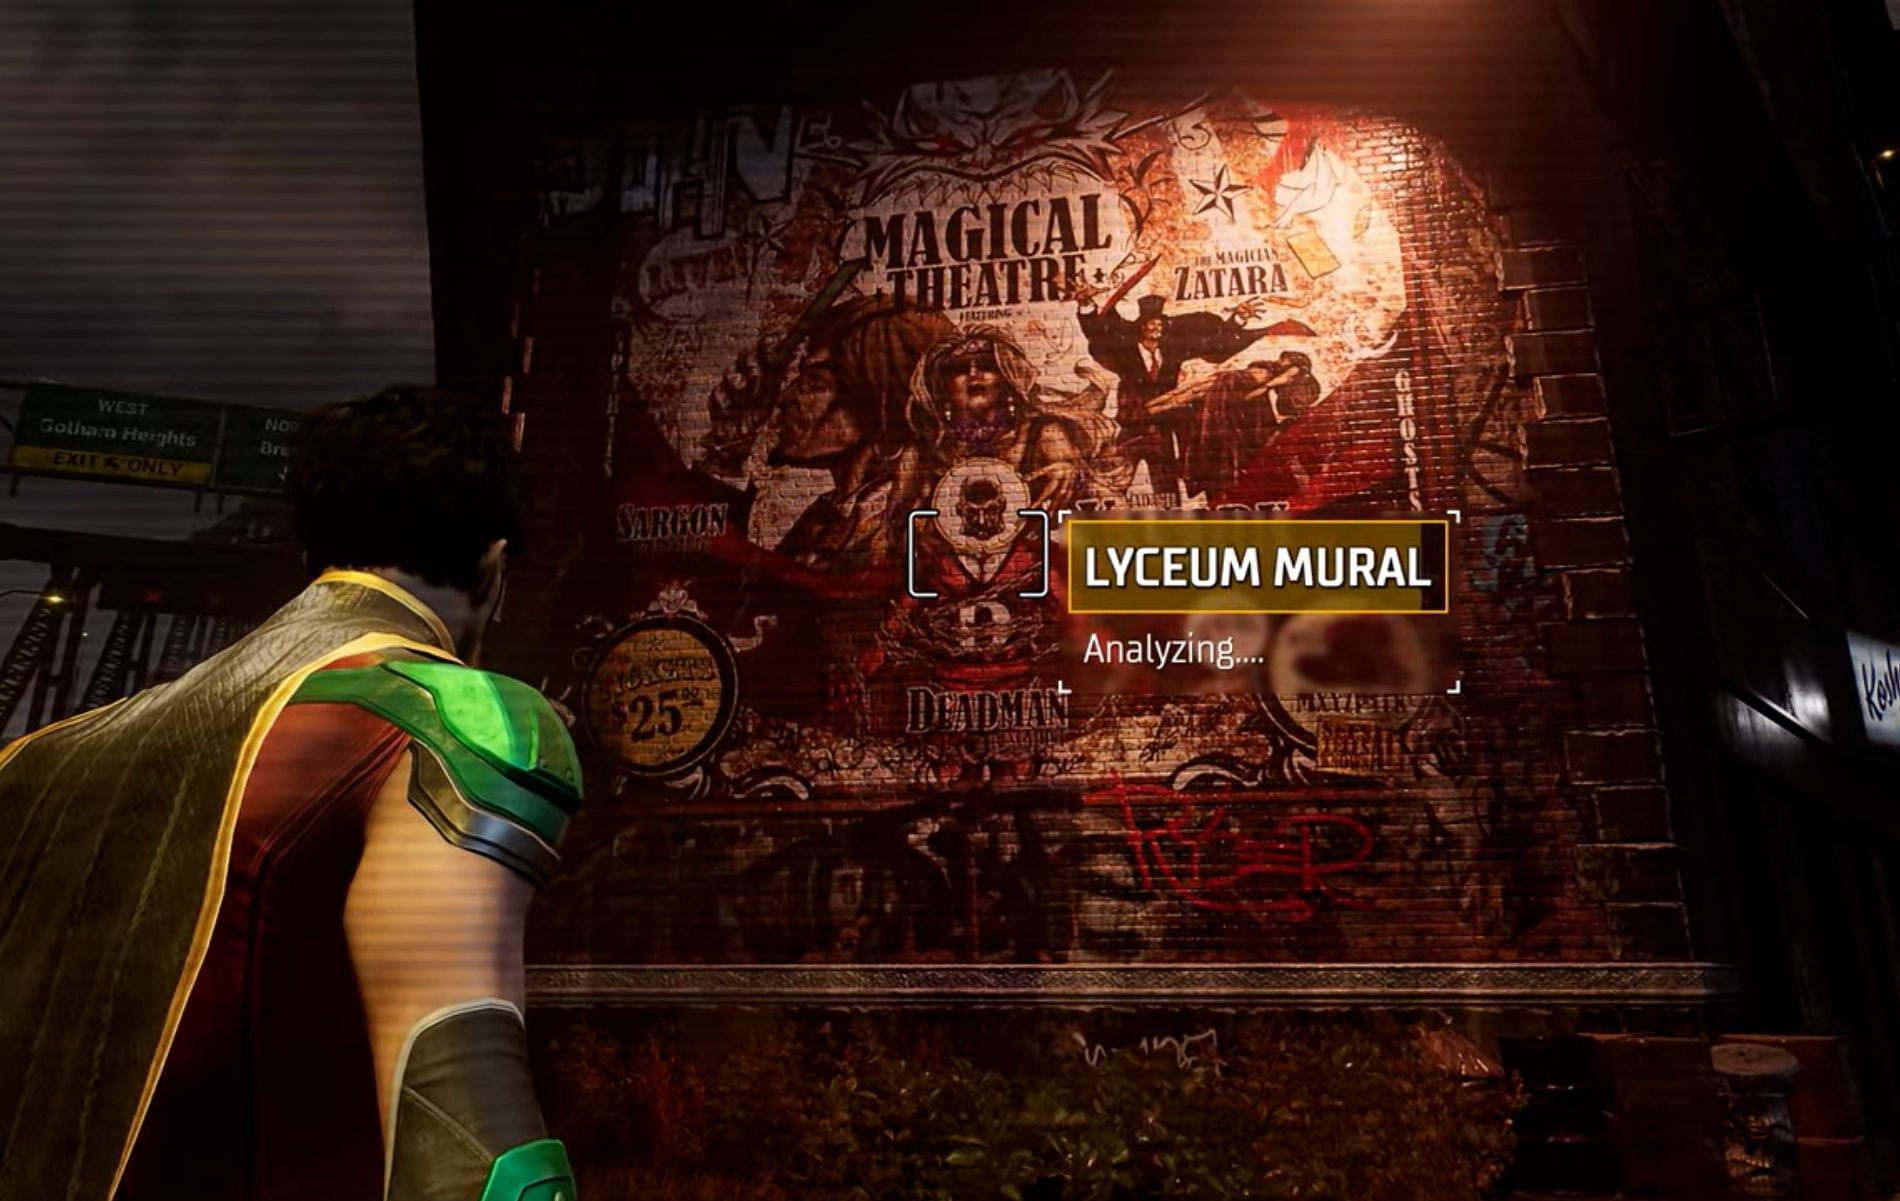 The Lyceum mural pays tribute to Bowery&rsquo;s past as a popular entertainment hub (Image via Batman Arkham Videos/YouTube)